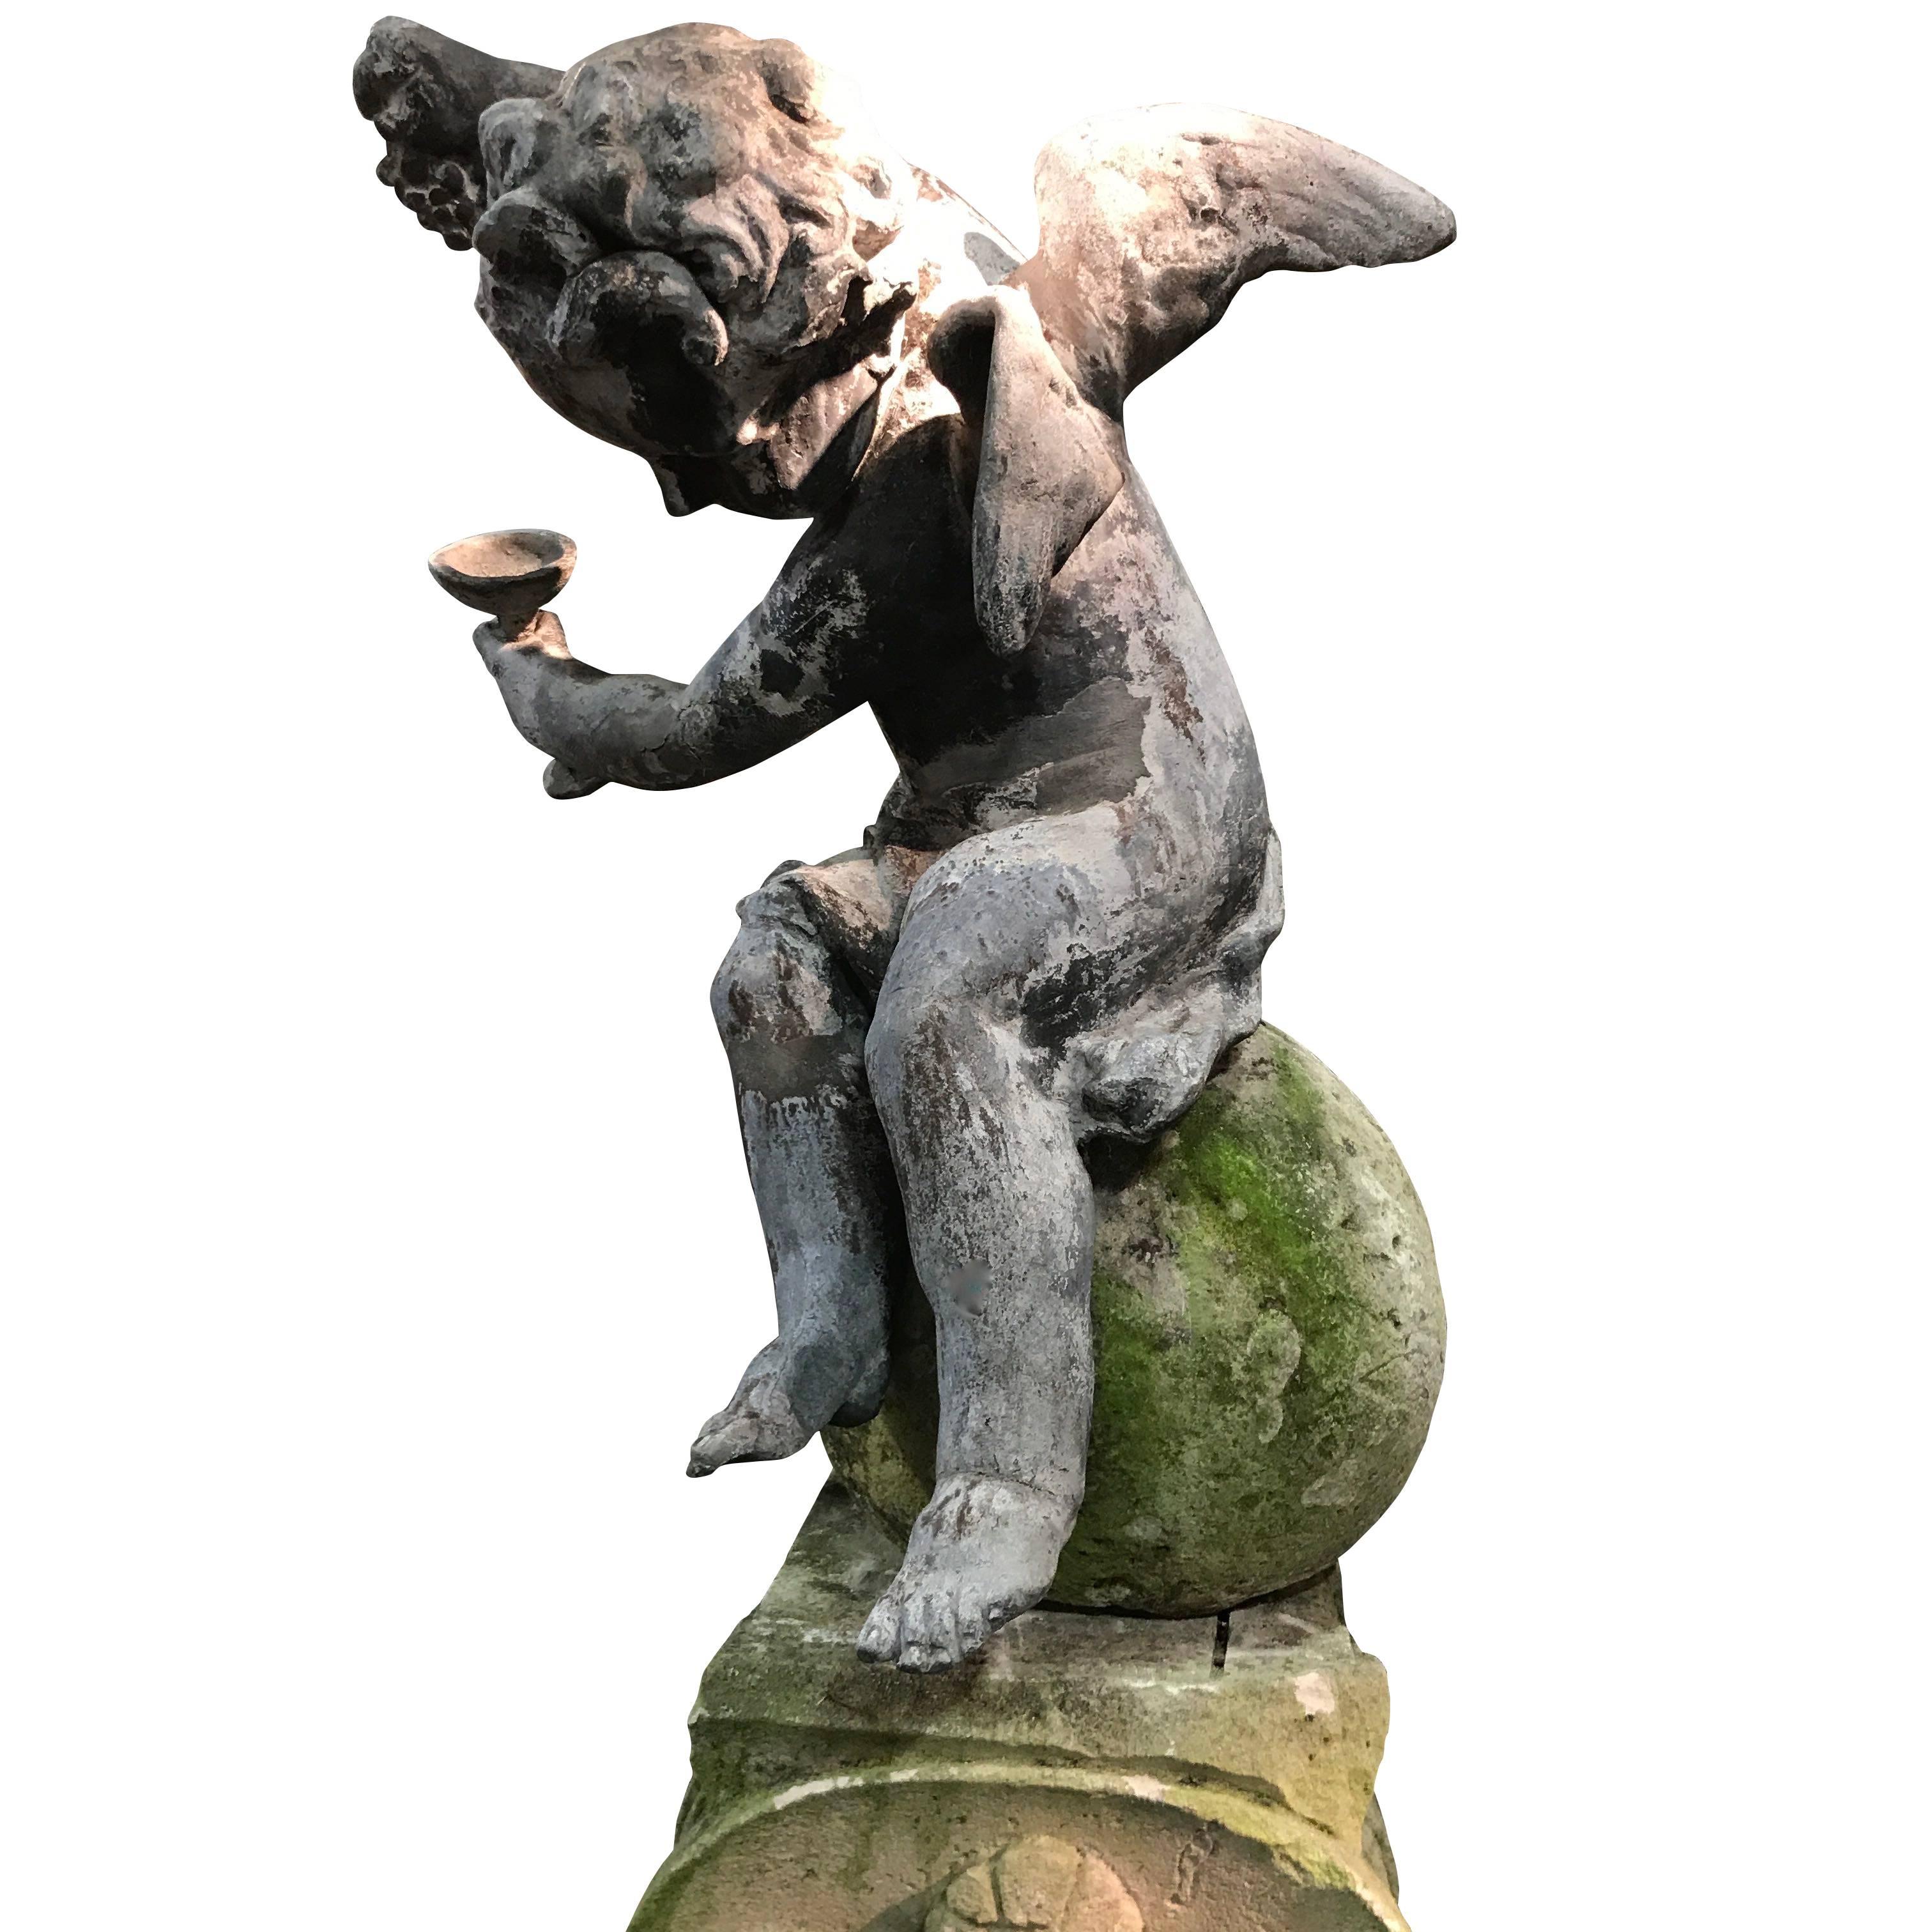 English Regency leaded cherub atop carved limestone column, circa 1820
Natural weathered patina.
Very decorative and a focal point in any garden.
Base is 17